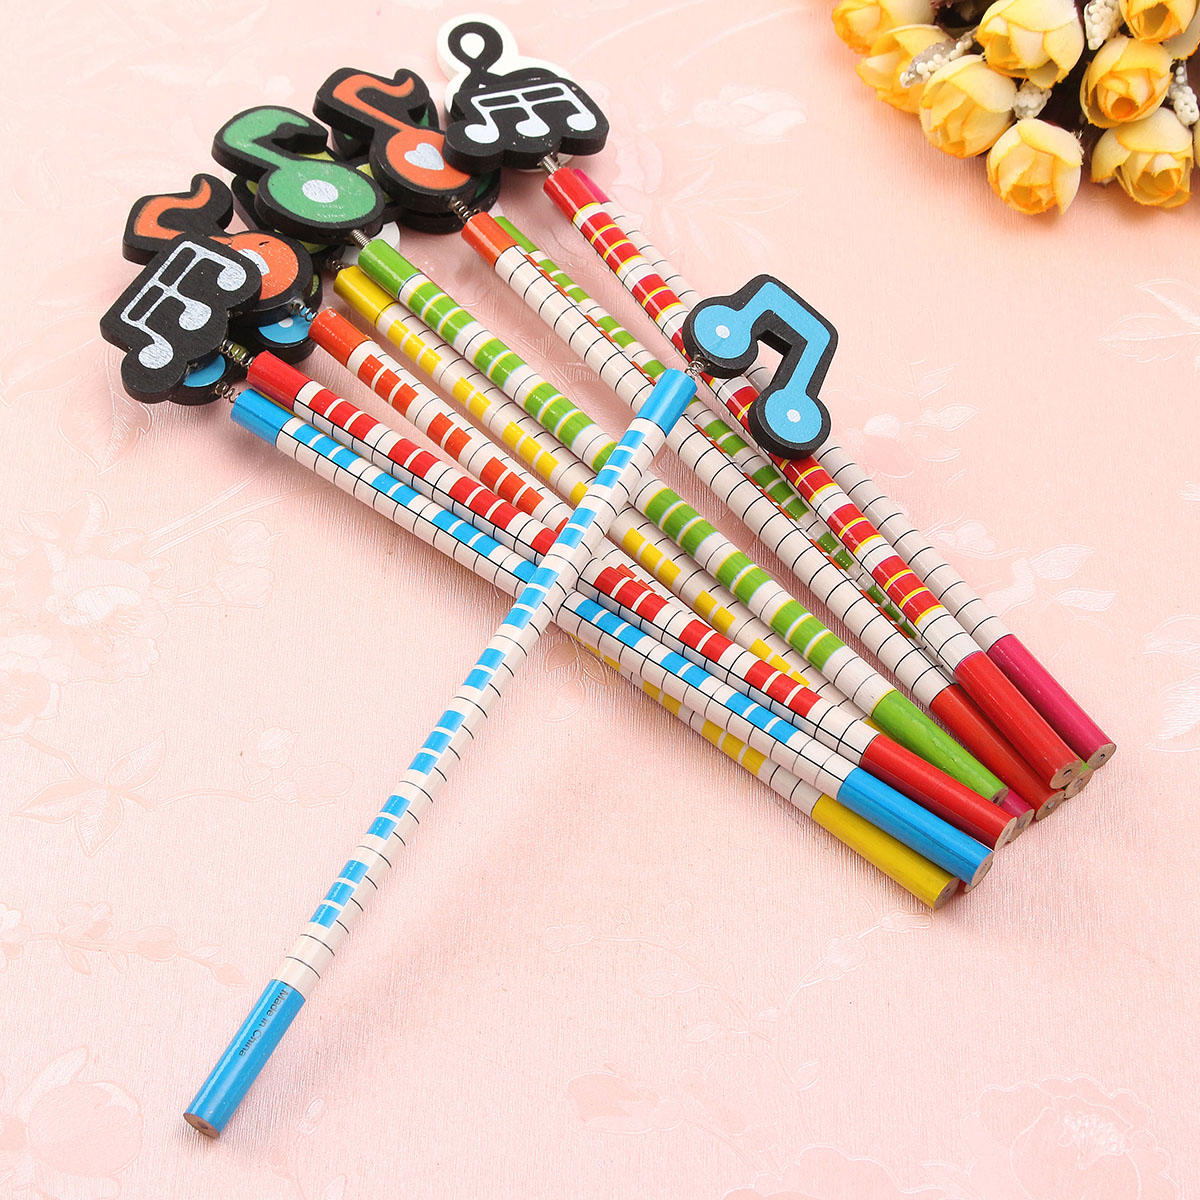 1Wooden Pencils Musical Note Patterns Cartoon Pencils Writing Painting Stationery Gifts for Children, Banggood  - buy with discount